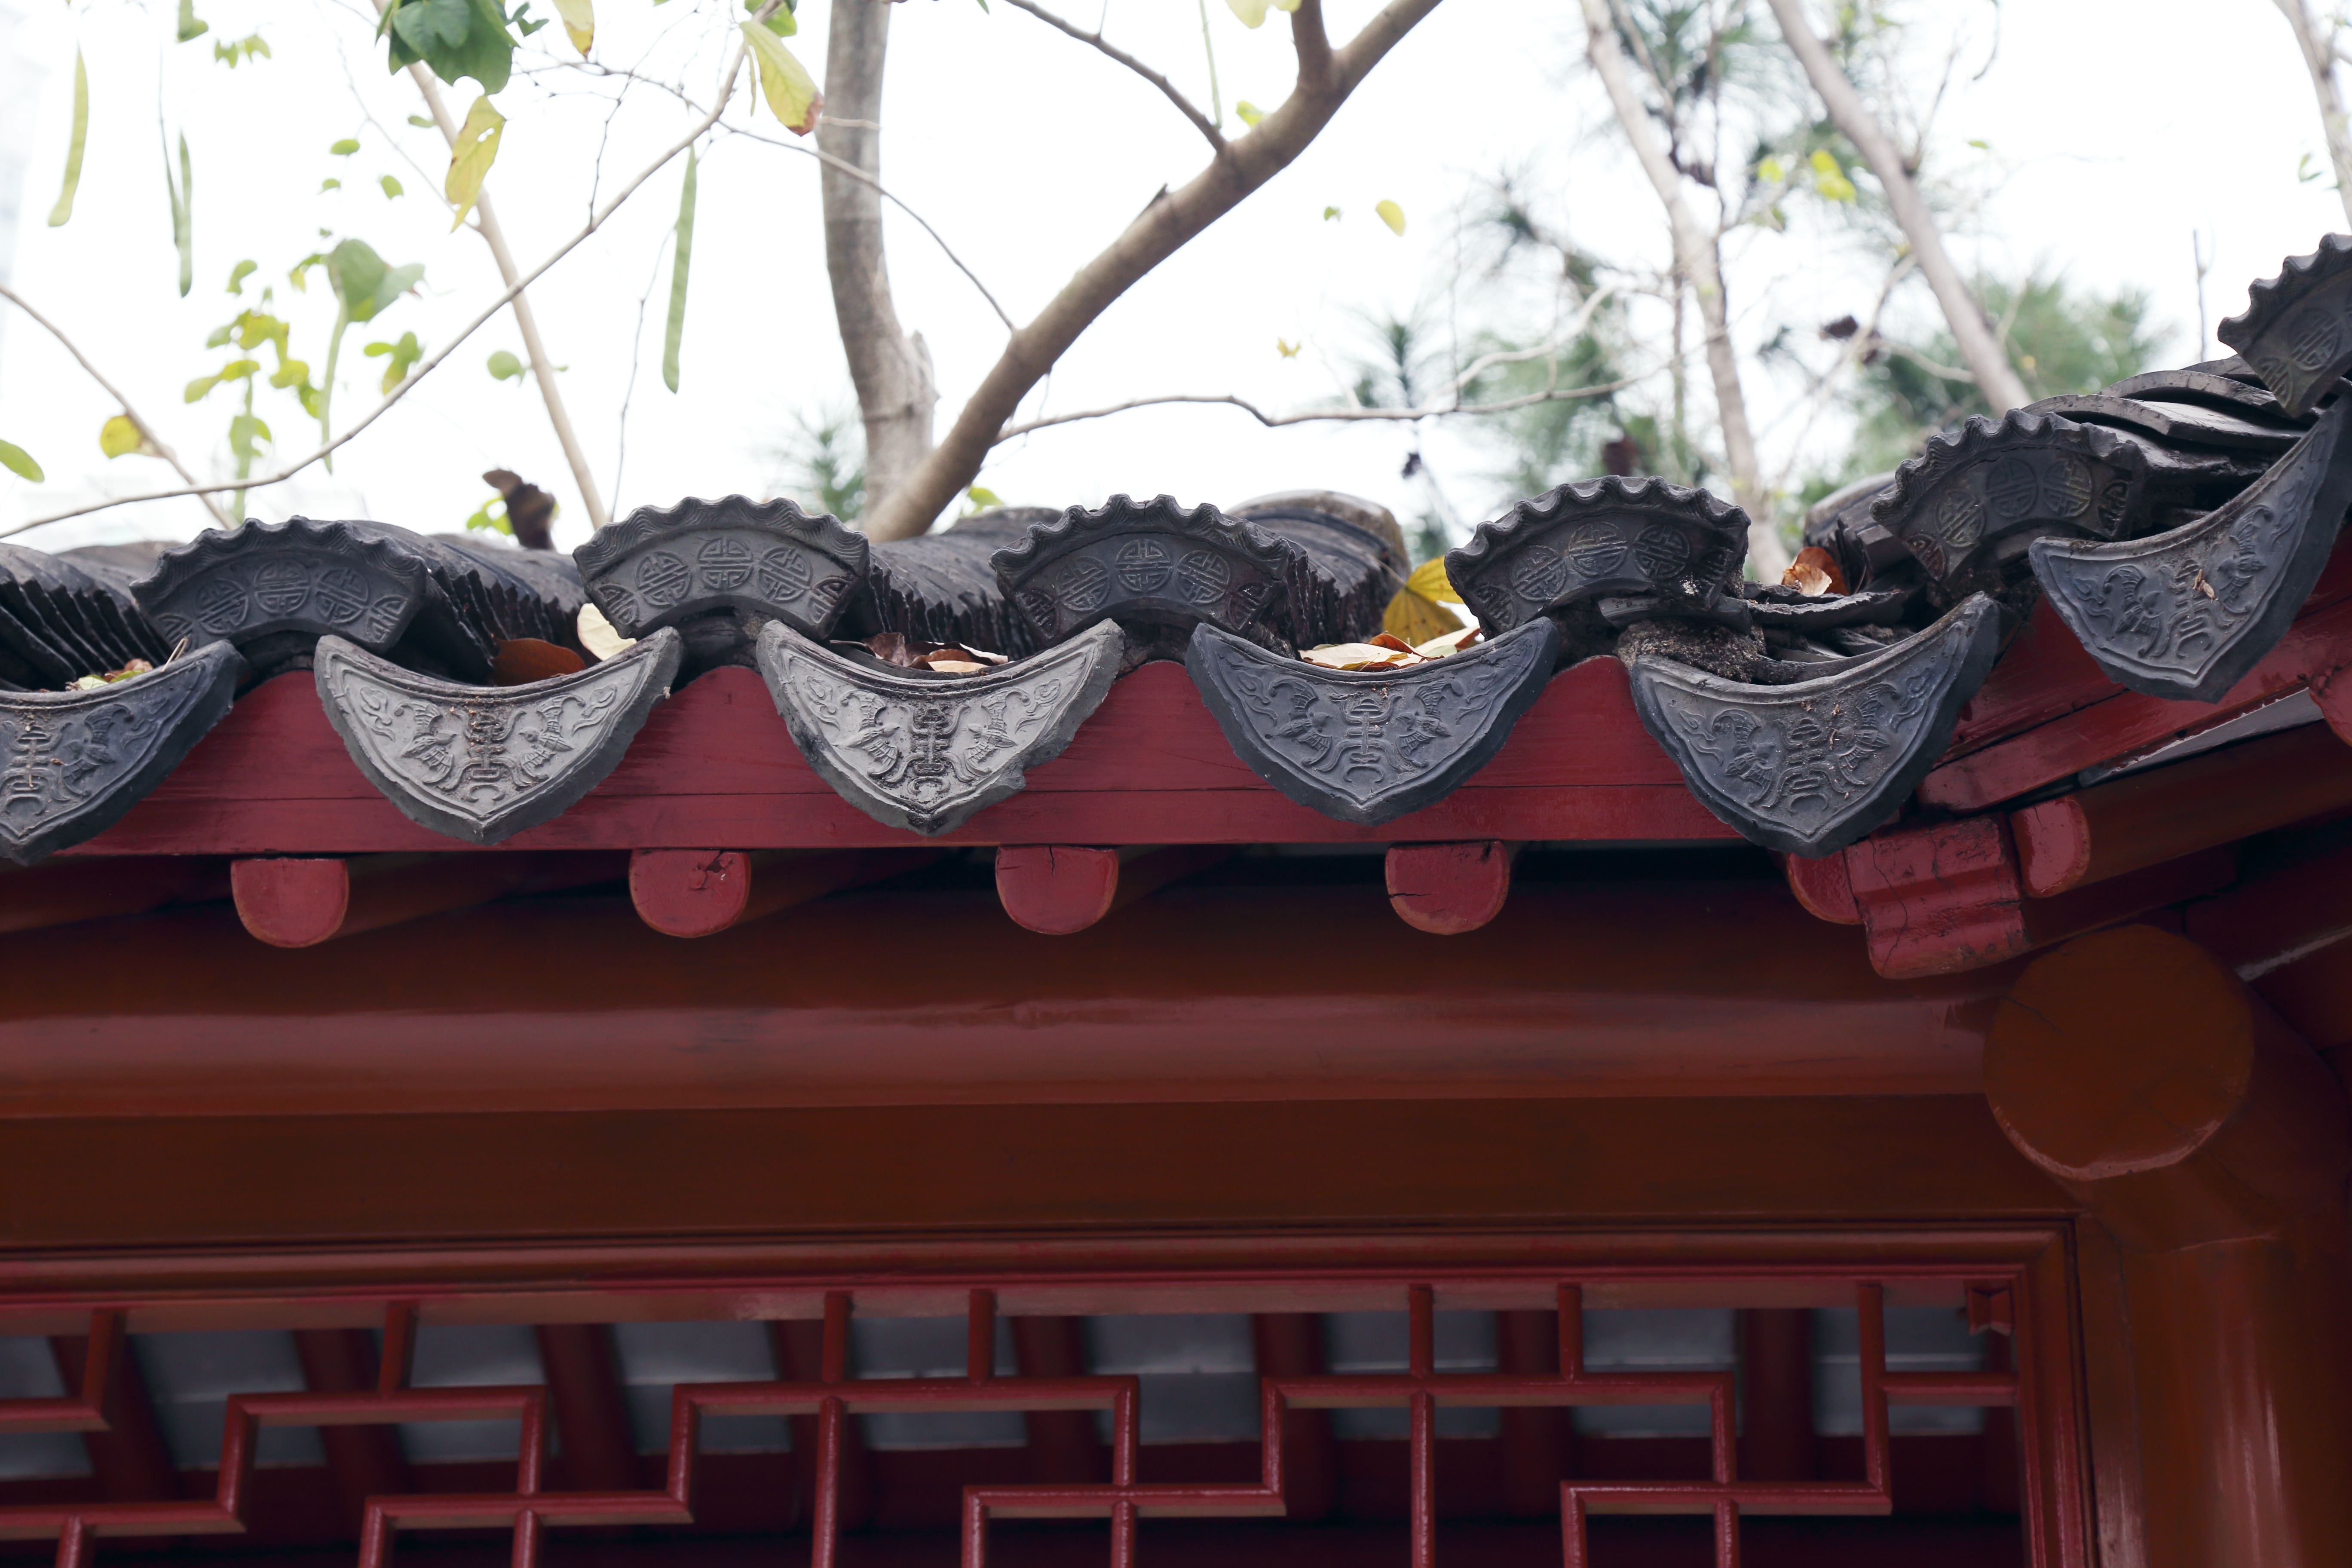 brown and black temple roof